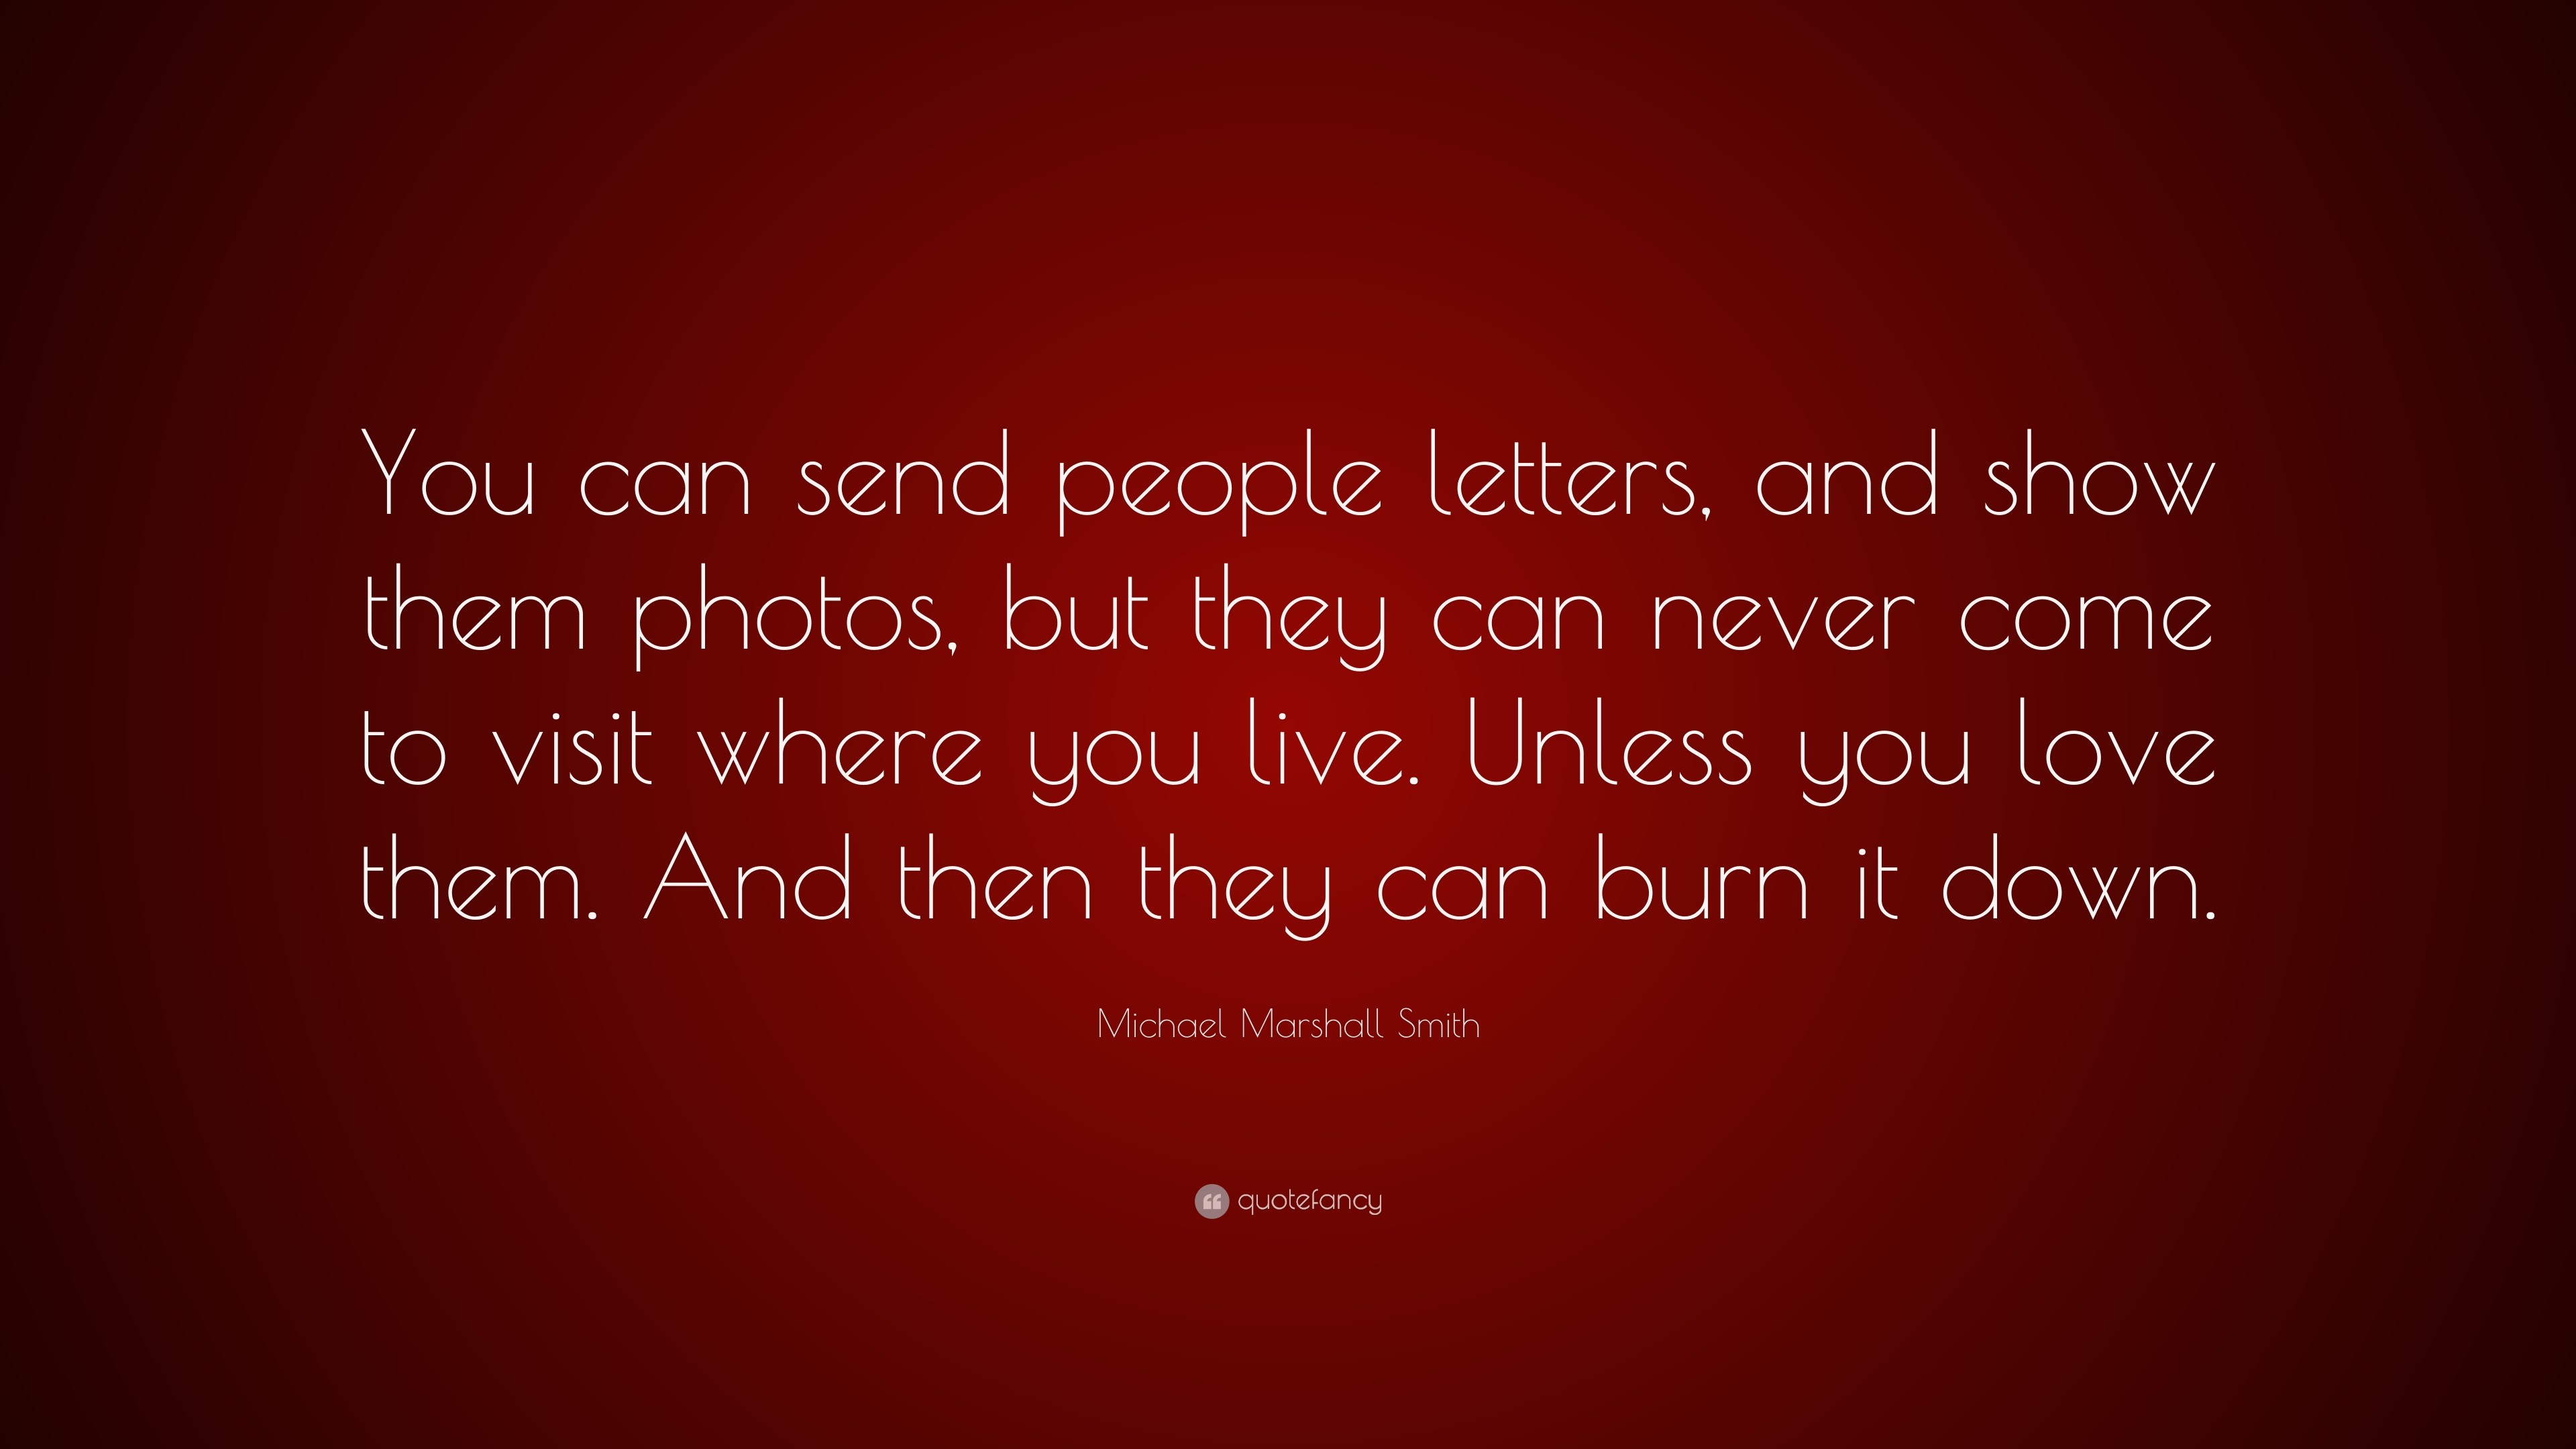 3840x2160 Michael Marshall Smith Quote: “You can send people letters, and show them  photos